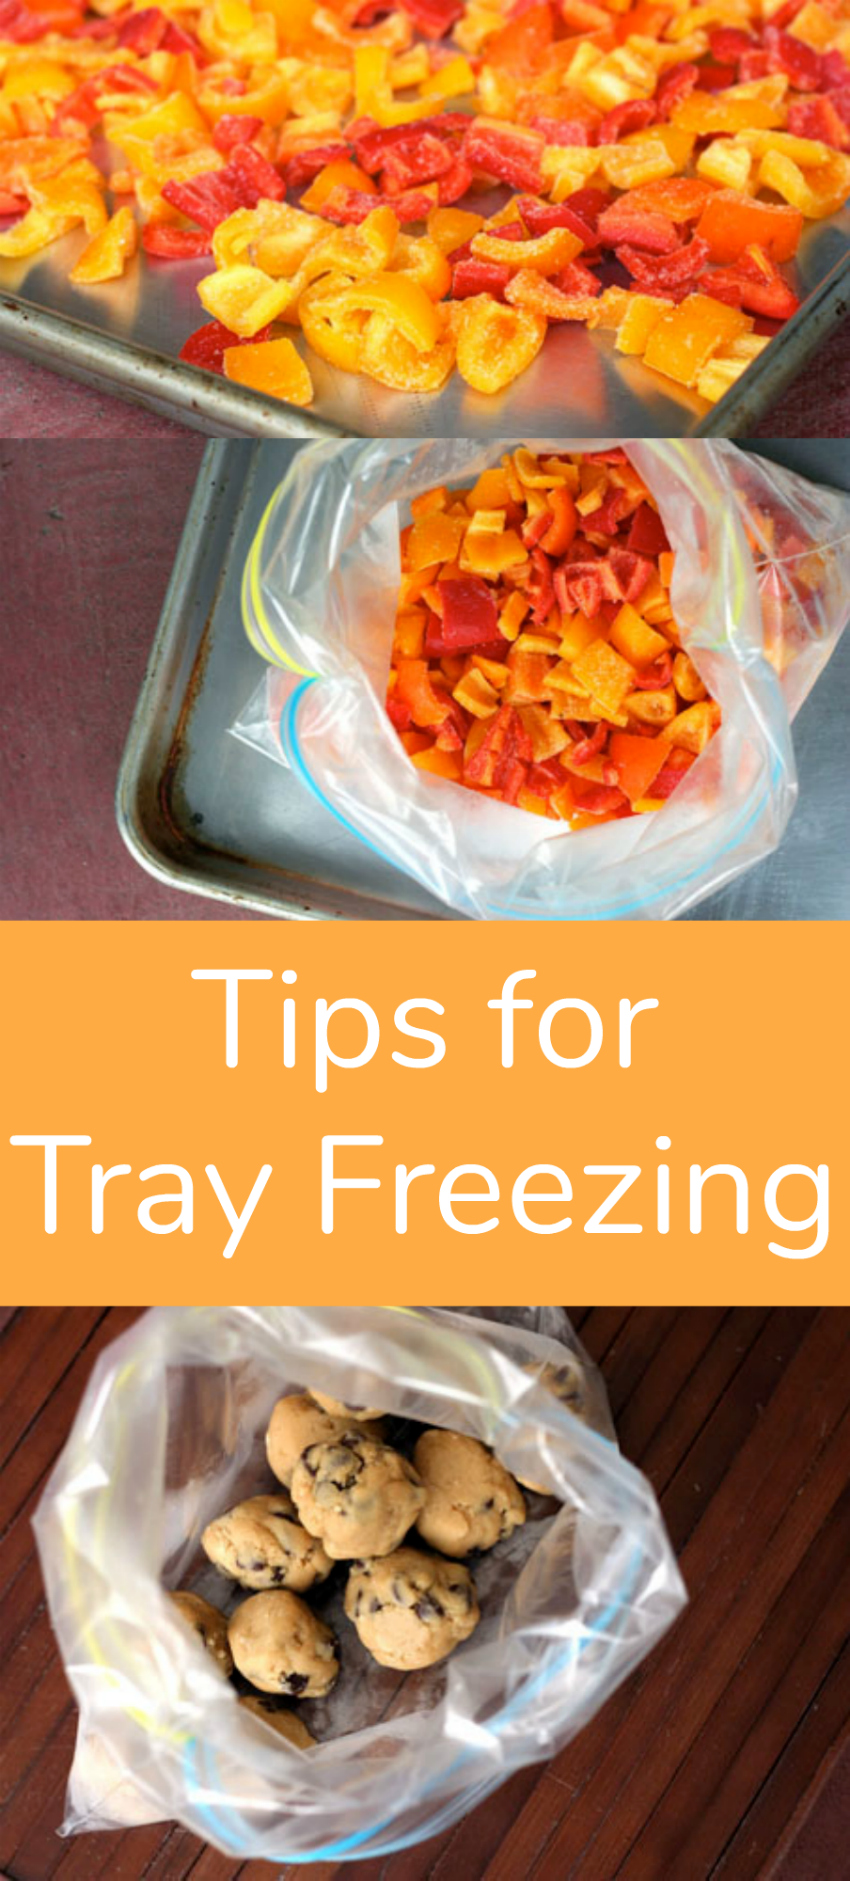 Tips for Tray Freezing